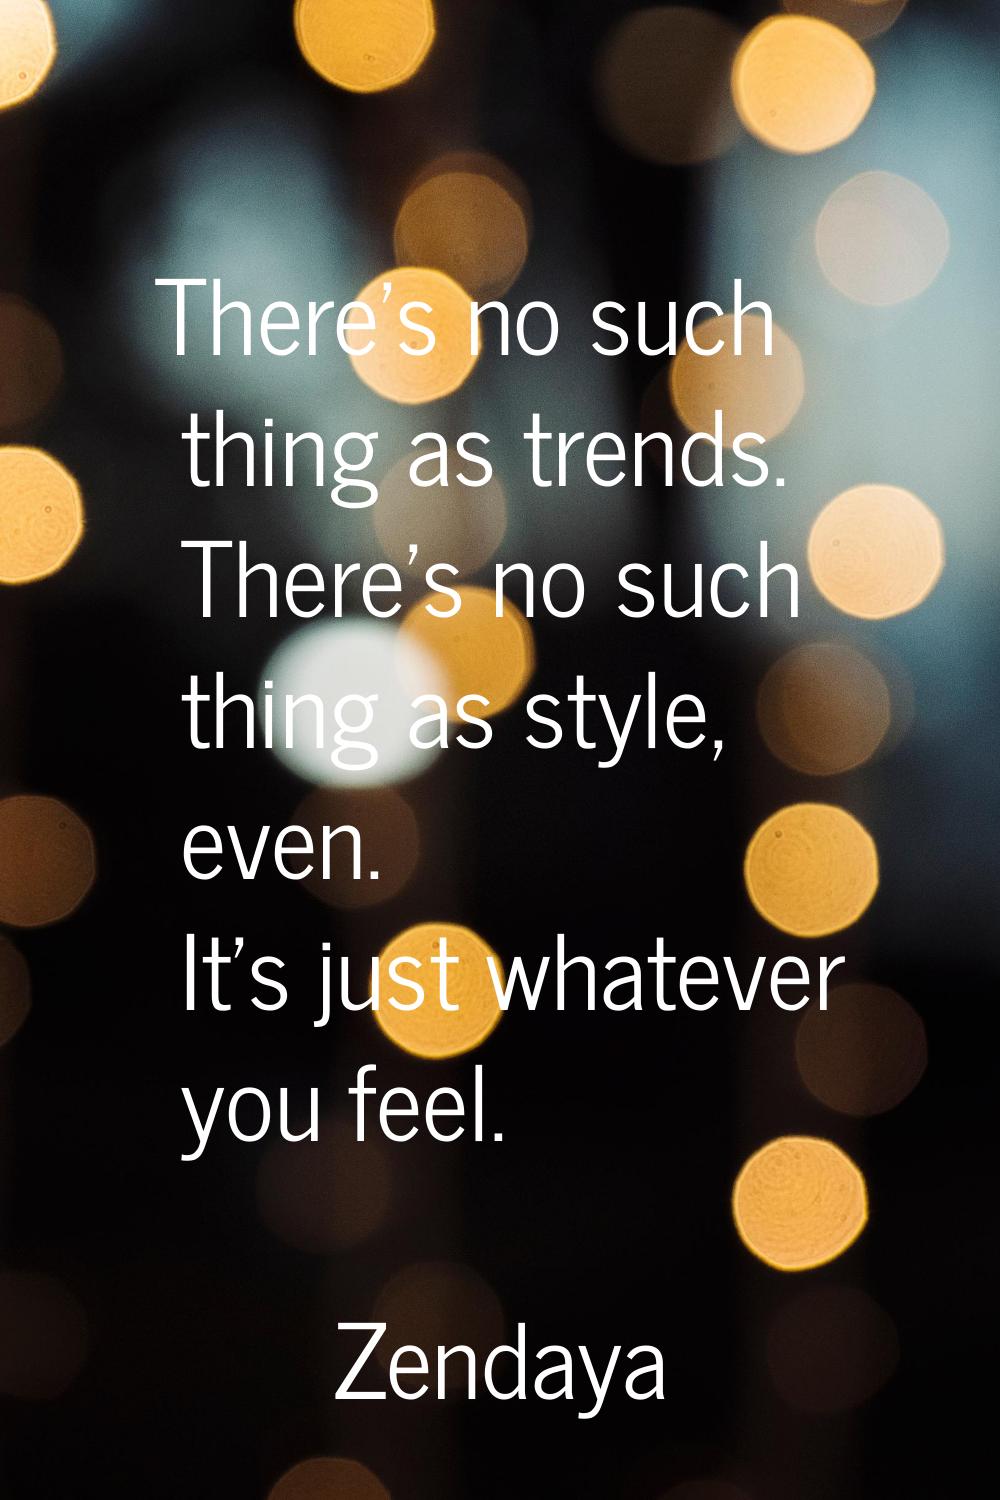 There's no such thing as trends. There's no such thing as style, even. It's just whatever you feel.